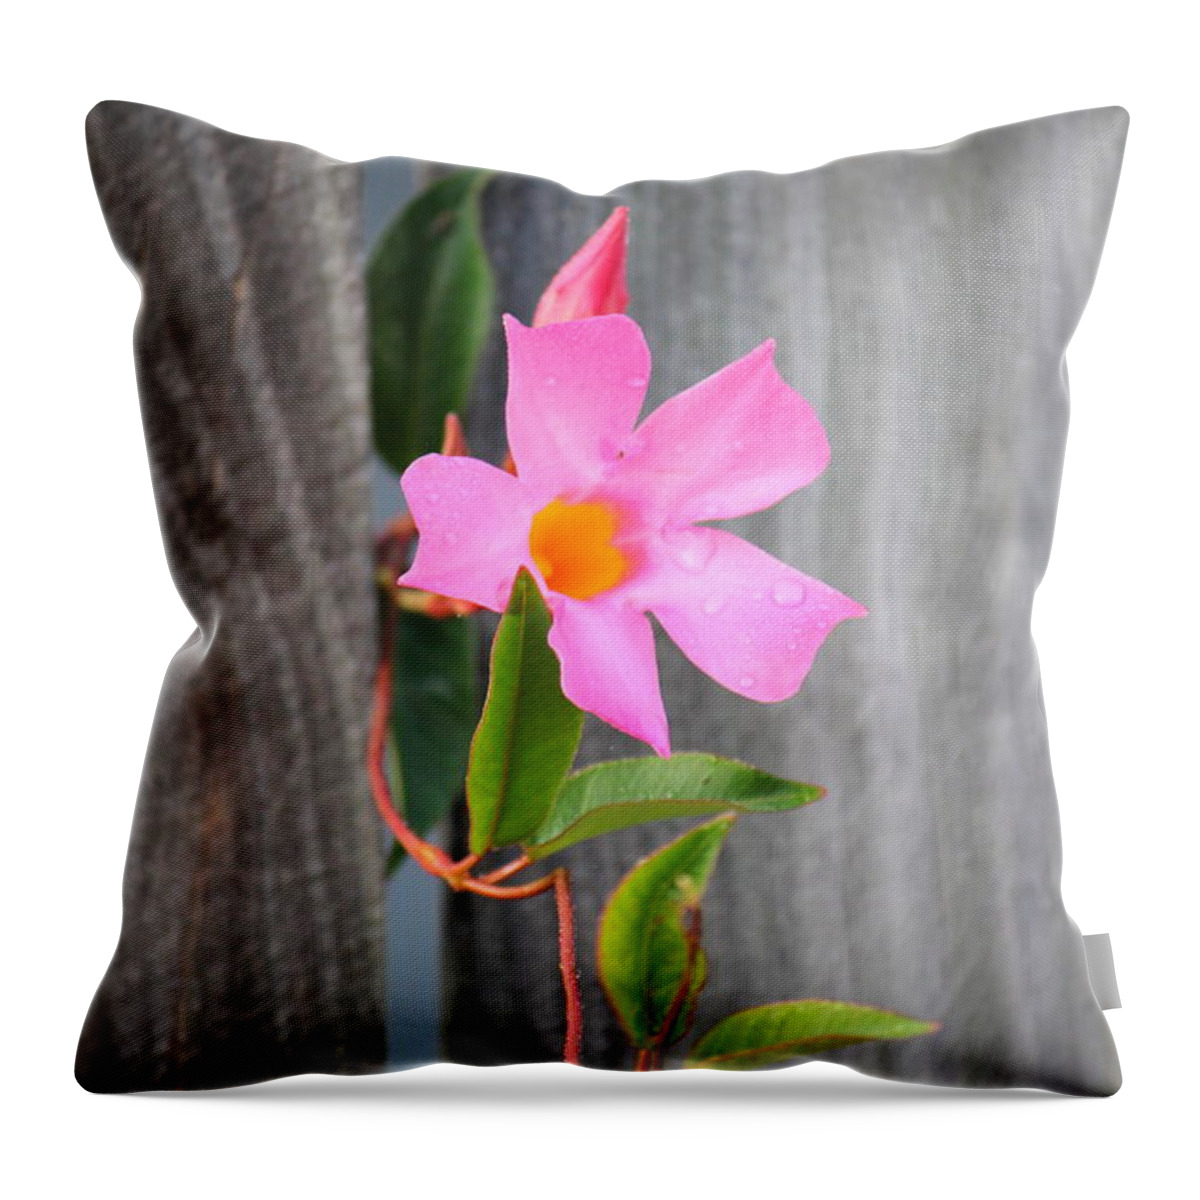 Flower Throw Pillow featuring the photograph Pink Flower by Sheri Simmons